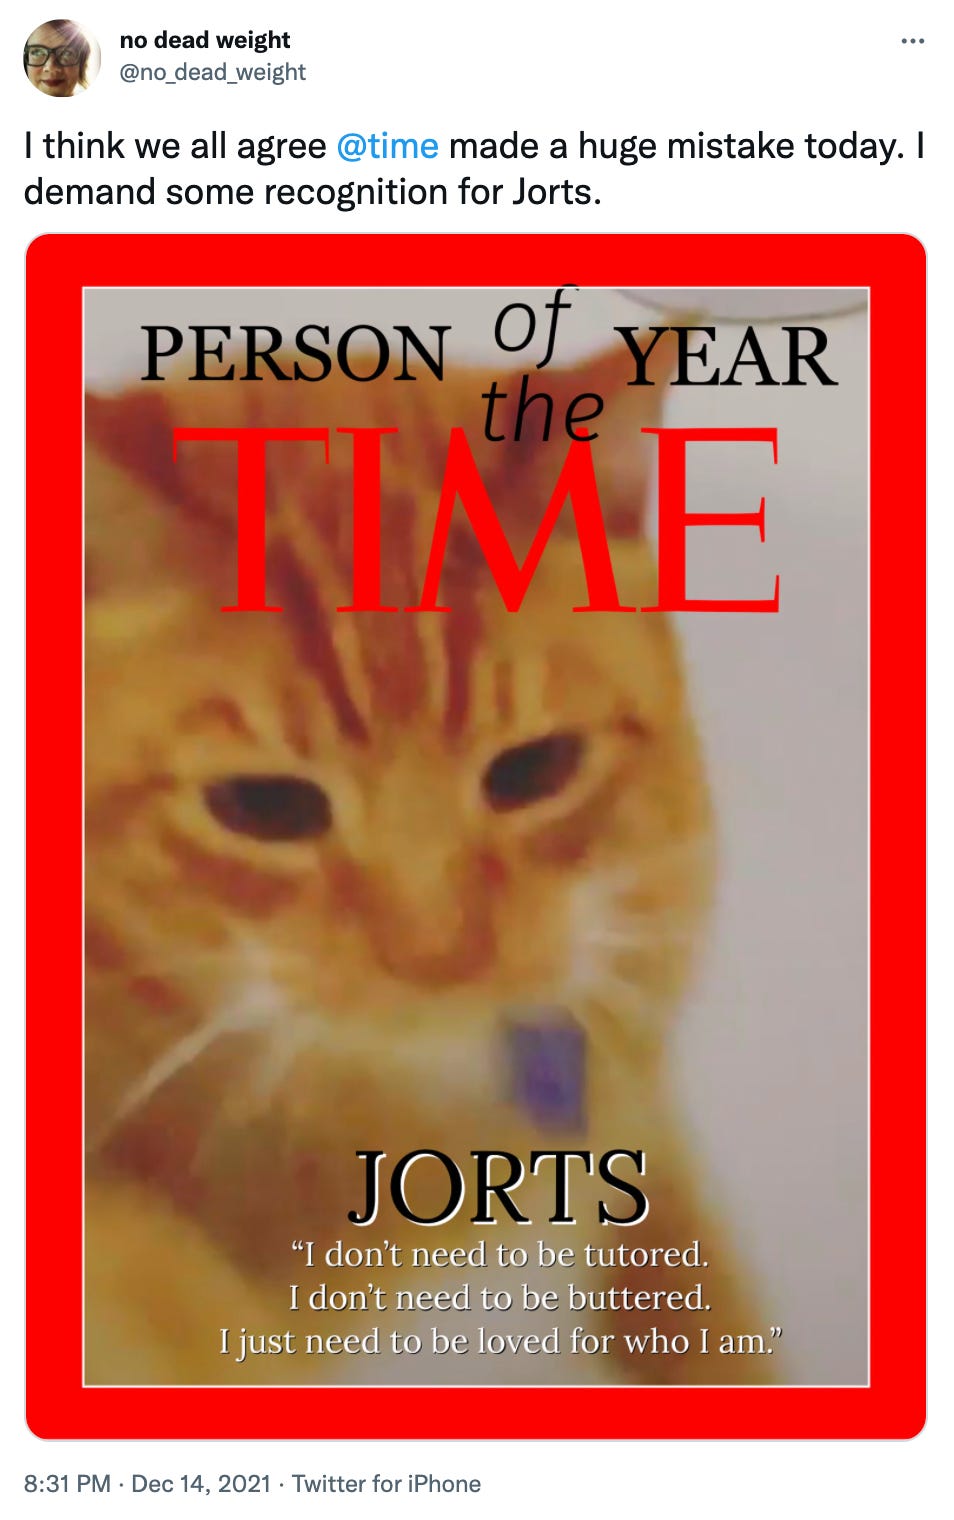 Tweet by @no_dead_weight: “I think we all agree @time made a huge mistake today. I demand some recognition for Jorts.” with a mockup of a Time Magazine Person of the Year cover showing Jorts the orange cat, and the caption JORTS, "I don’t need to be tutored. I don’t need to be buttered, I just need to be loved for who I am.” 